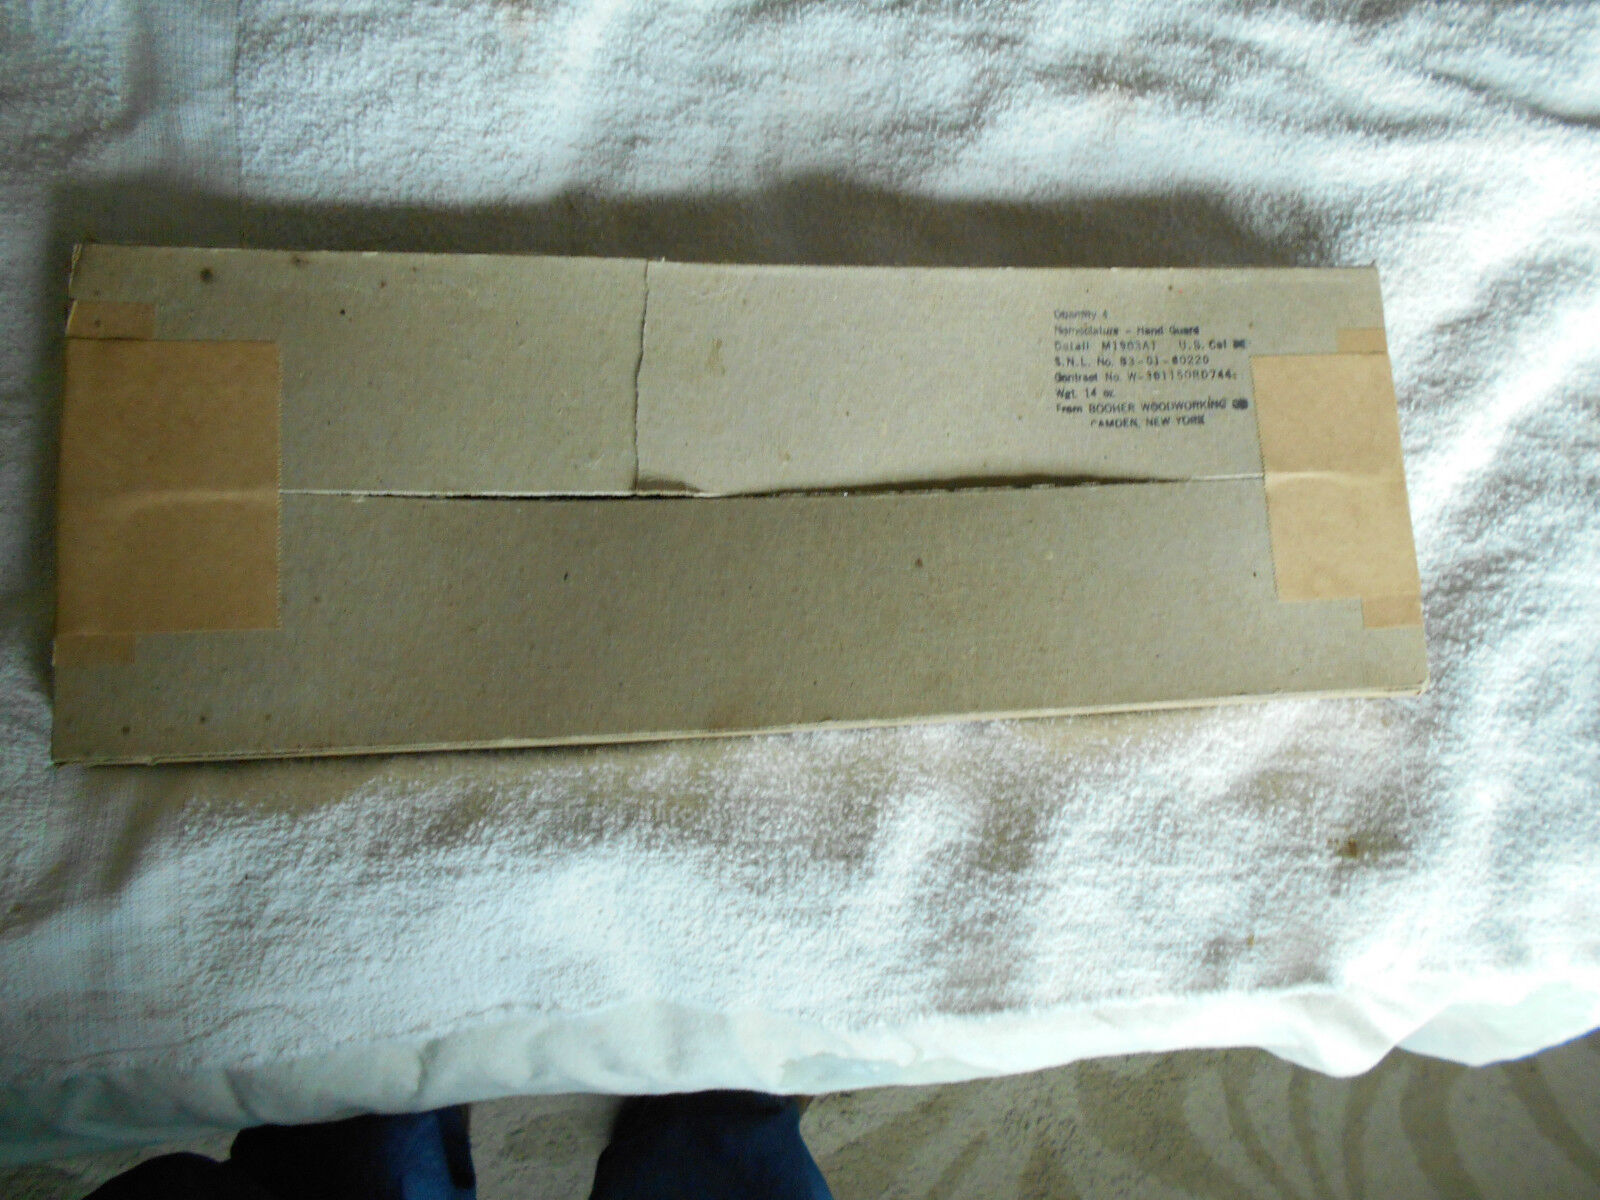 US model 1903 1903A1 springfied rifle parts NOS unissued wood stock handguard 